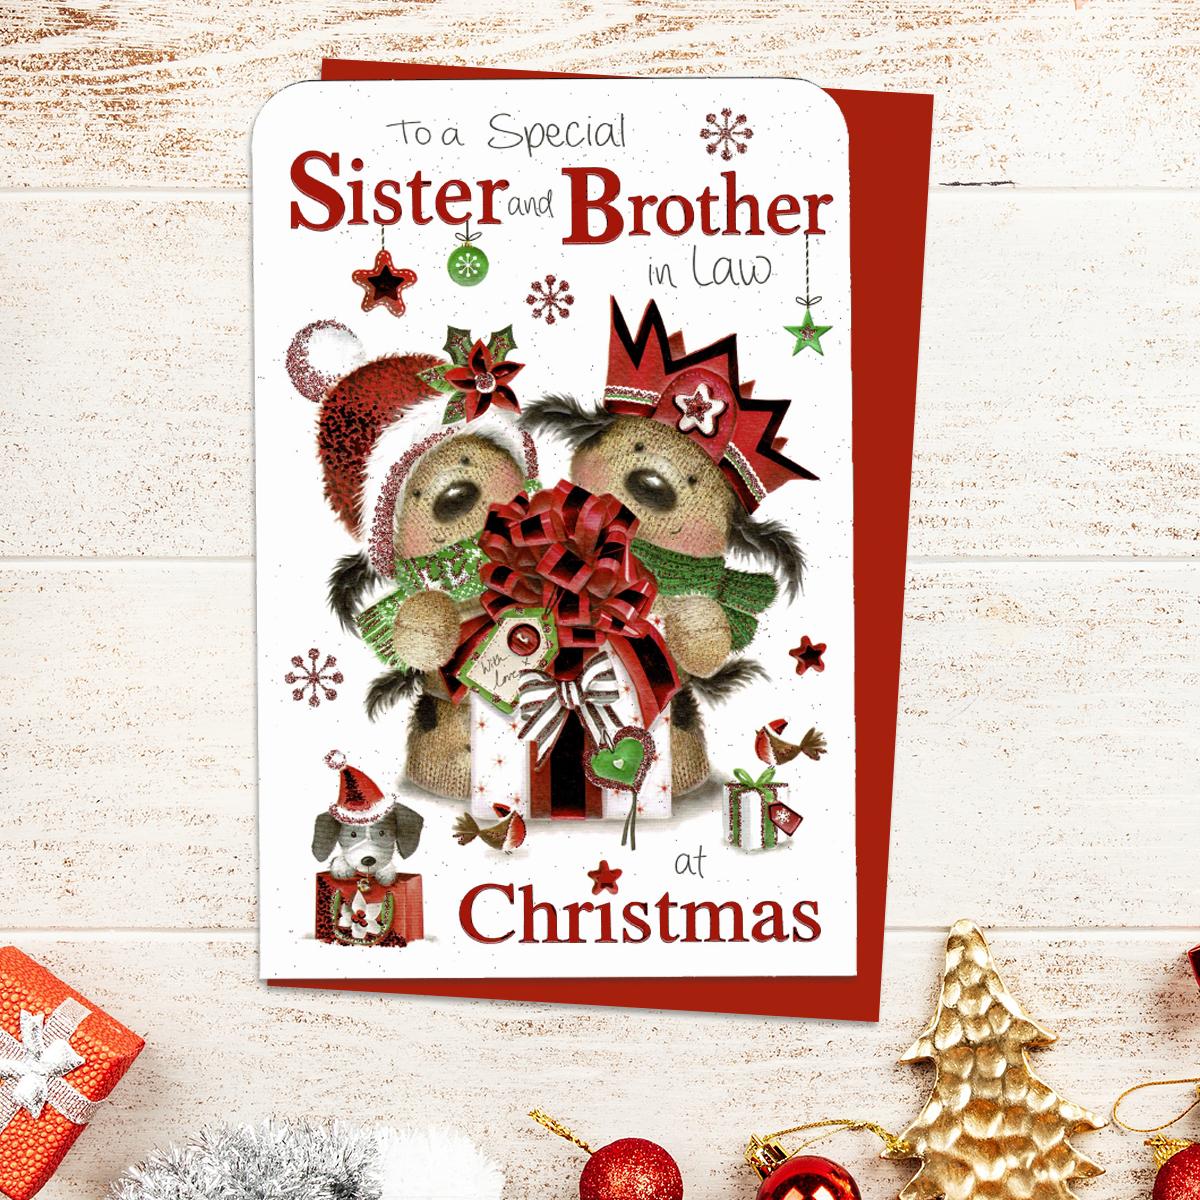 Sister And Brother In Law Christmas Card Alongside Its Red Envelope